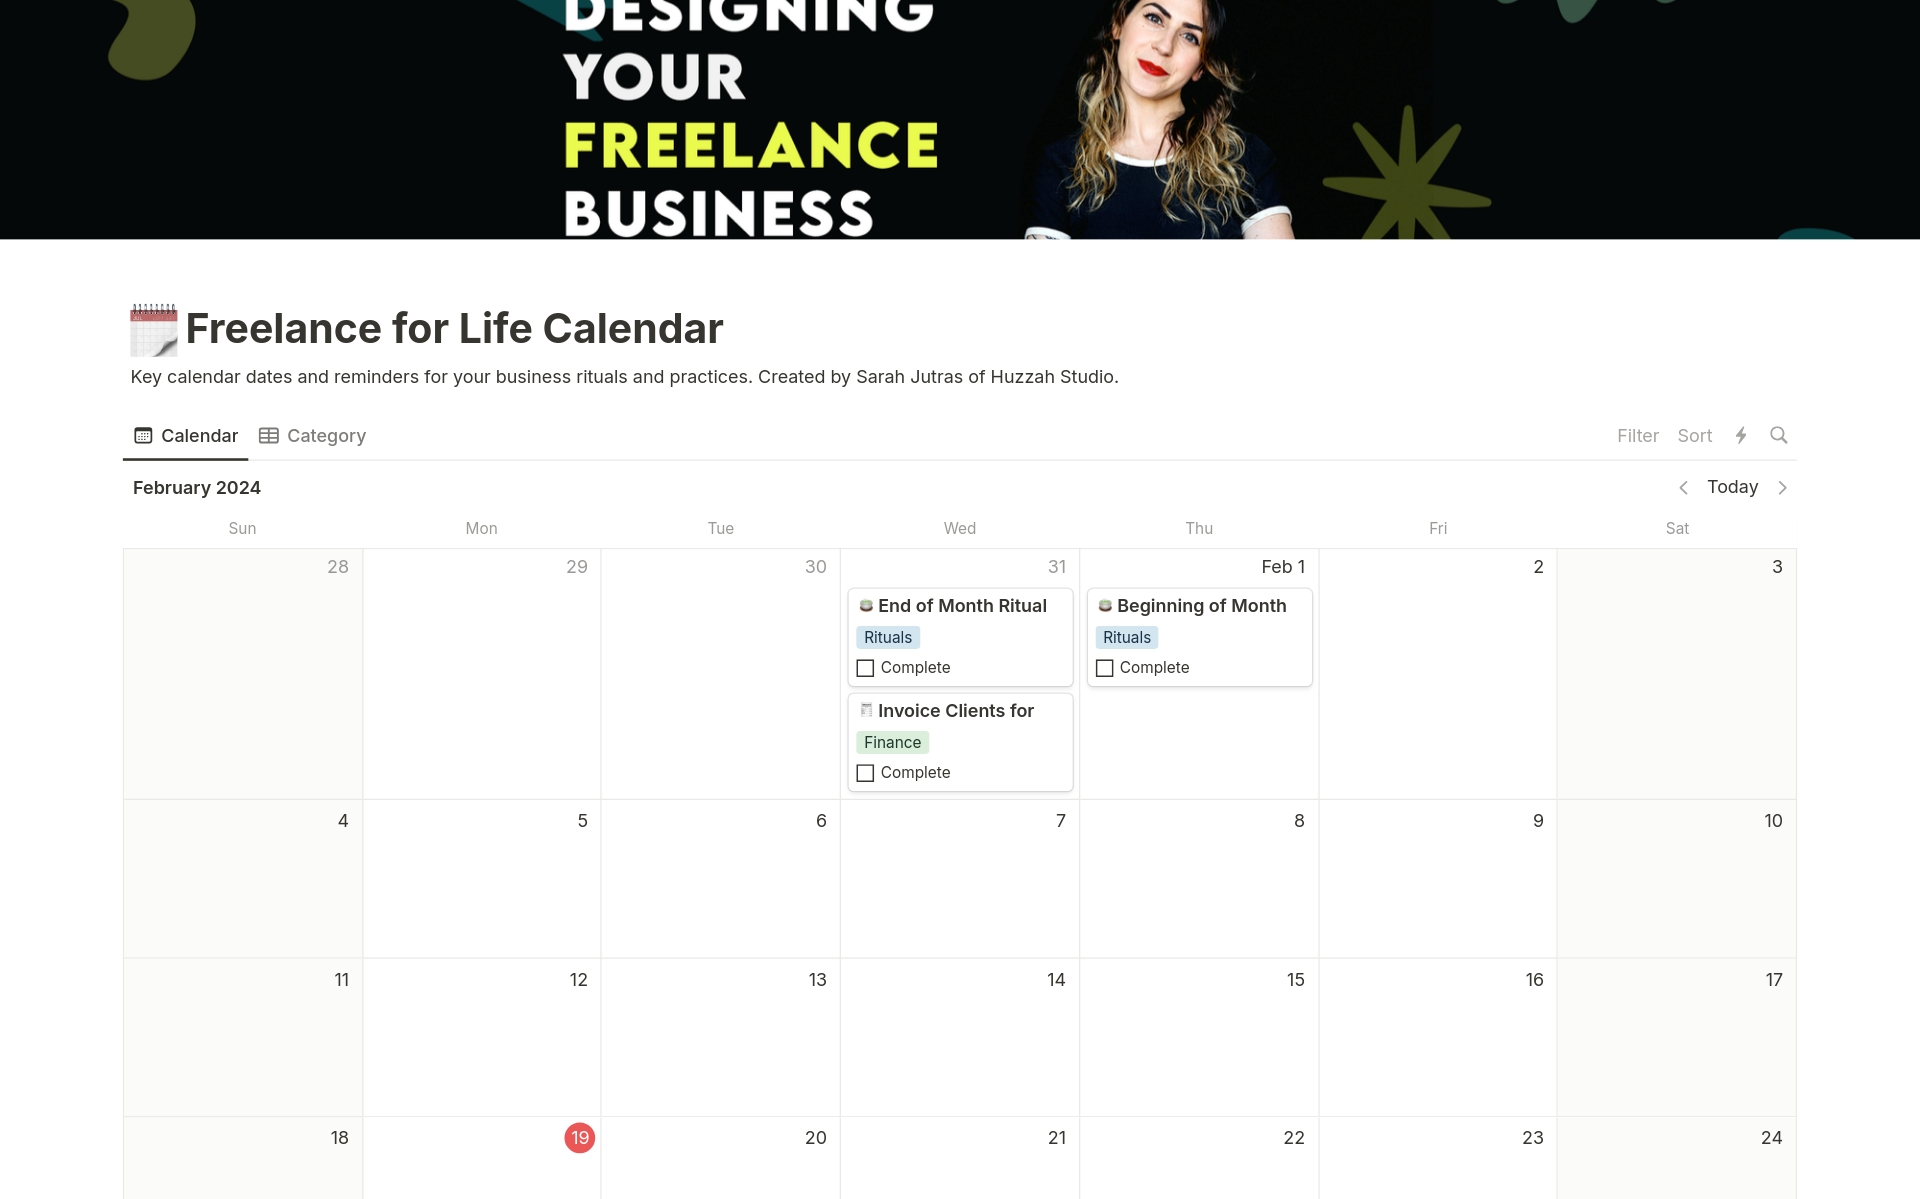 This free Notion template is the calendar every freelancer needs, to not only stay organized in your business practices but to help establish your routines and rituals.